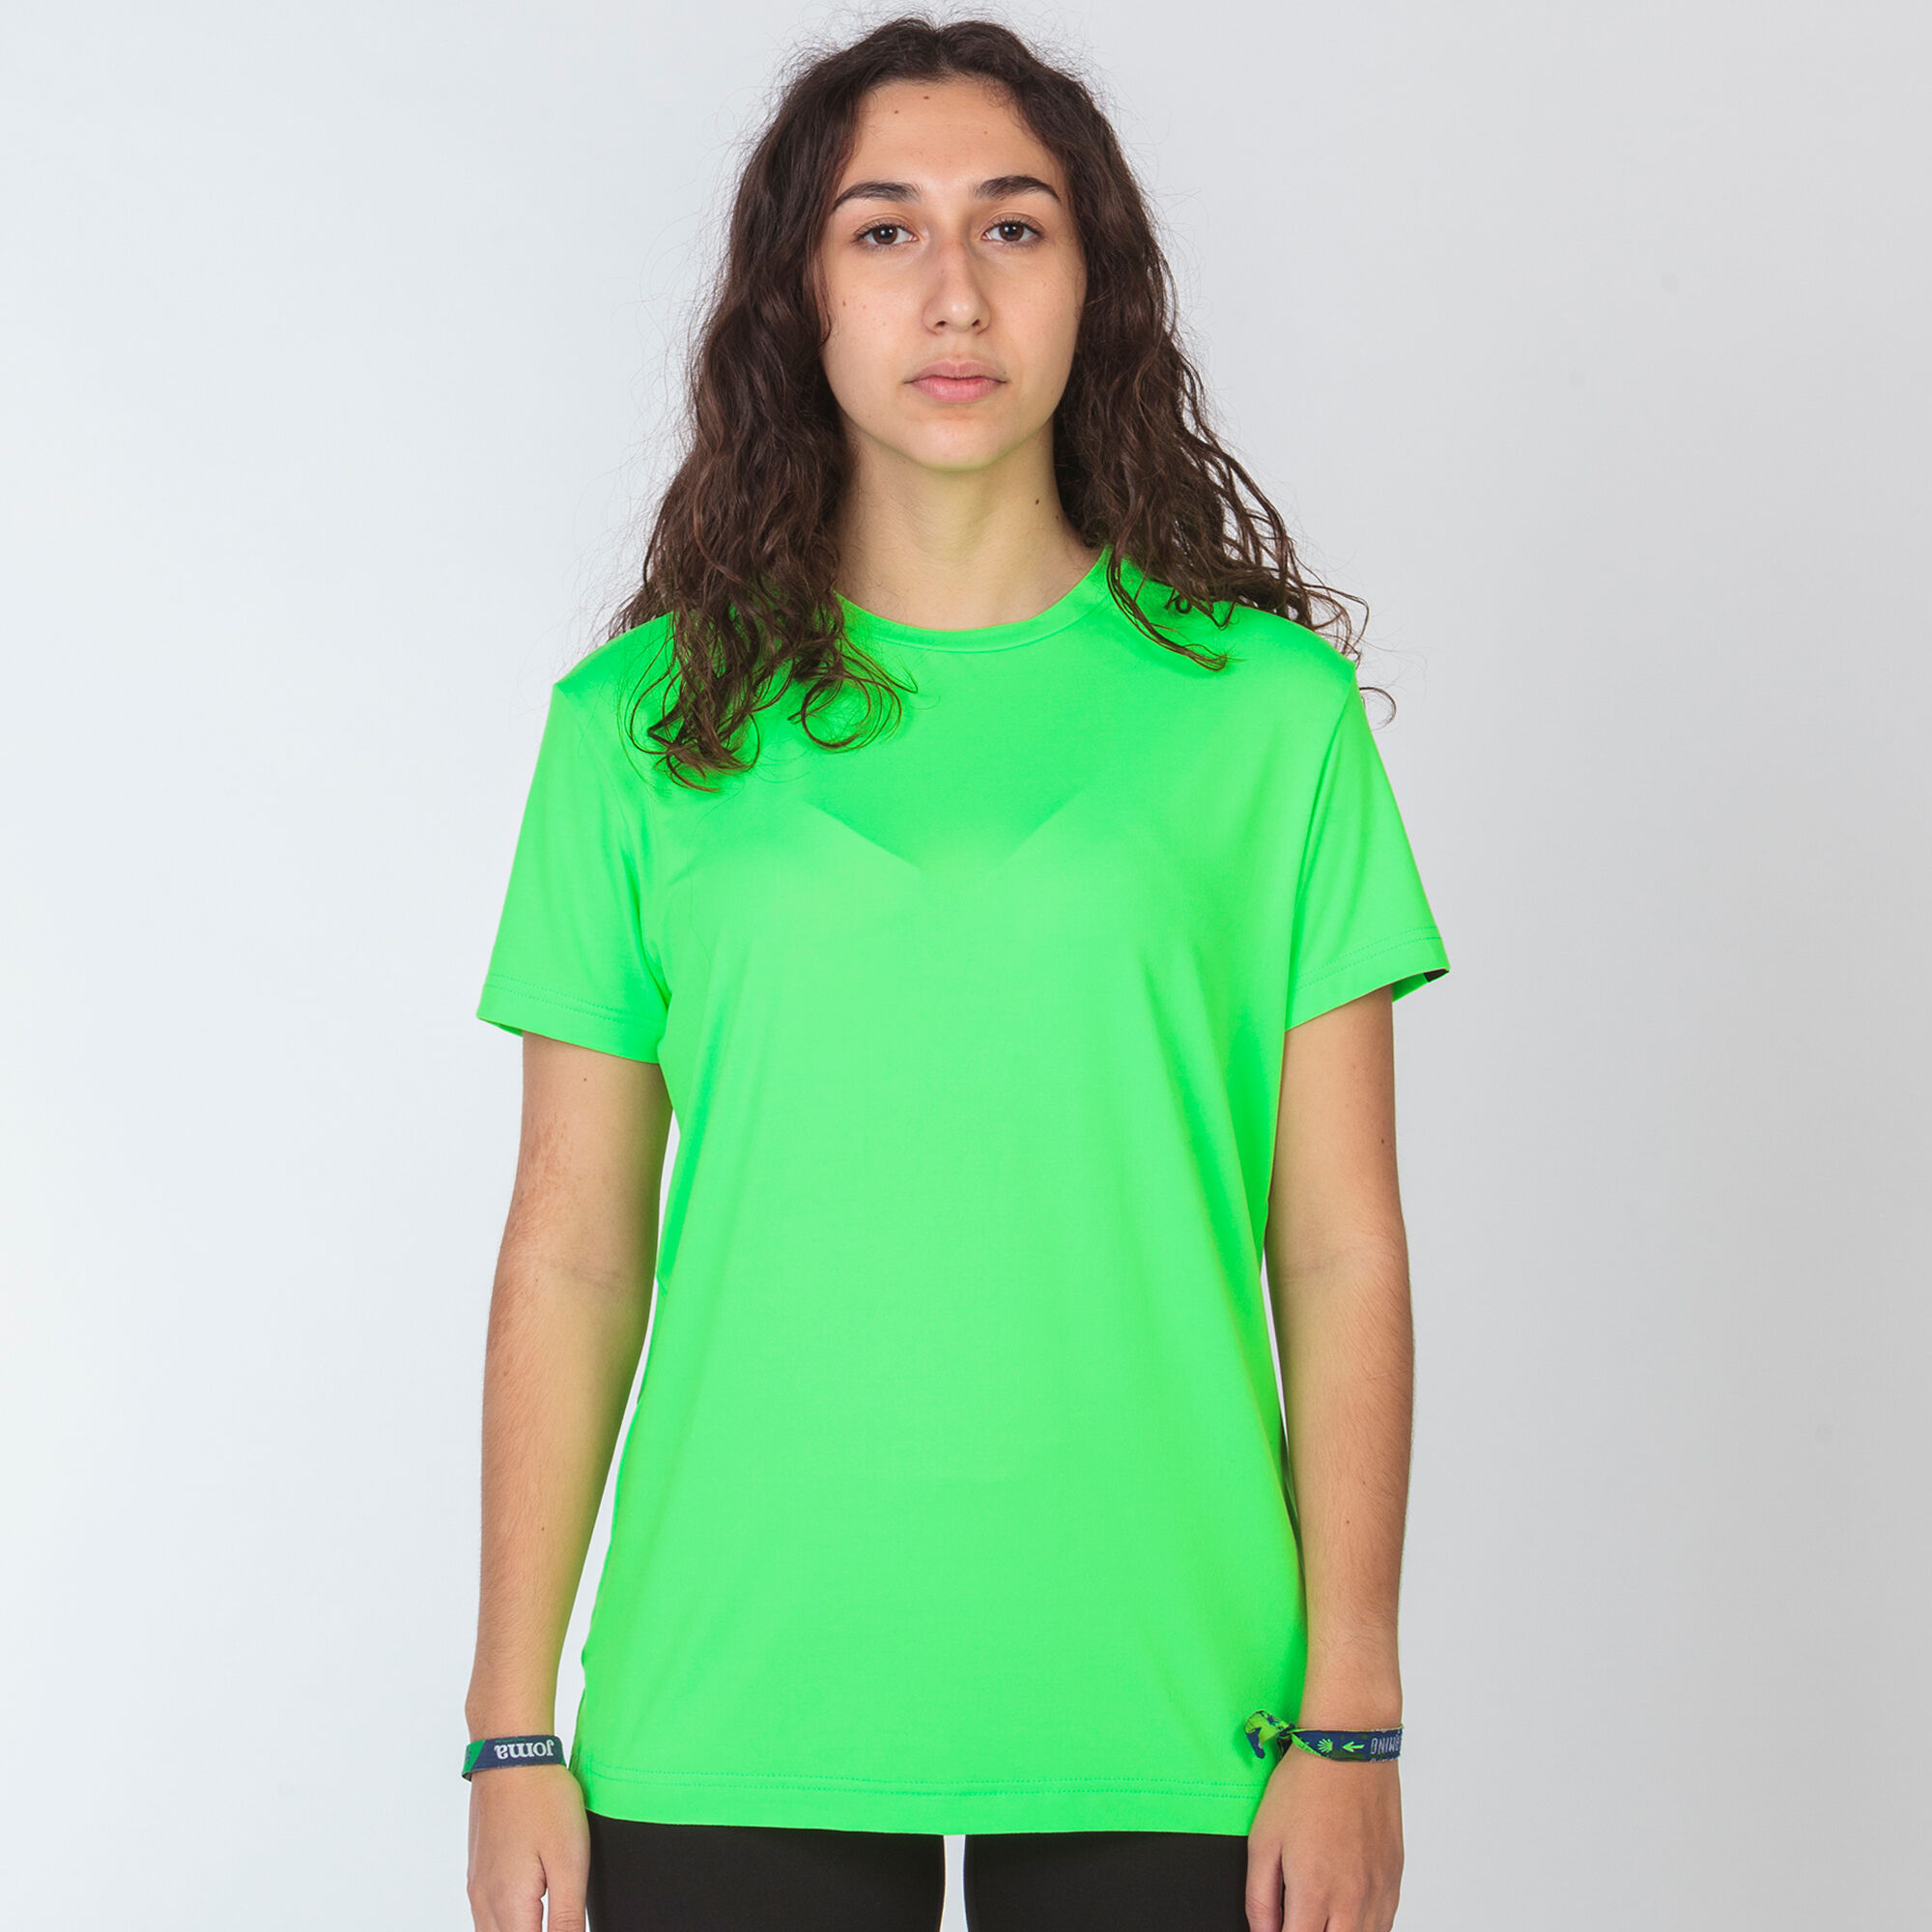 MAILLOT MANCHES COURTES FEMME TORNEO VERT FLUO